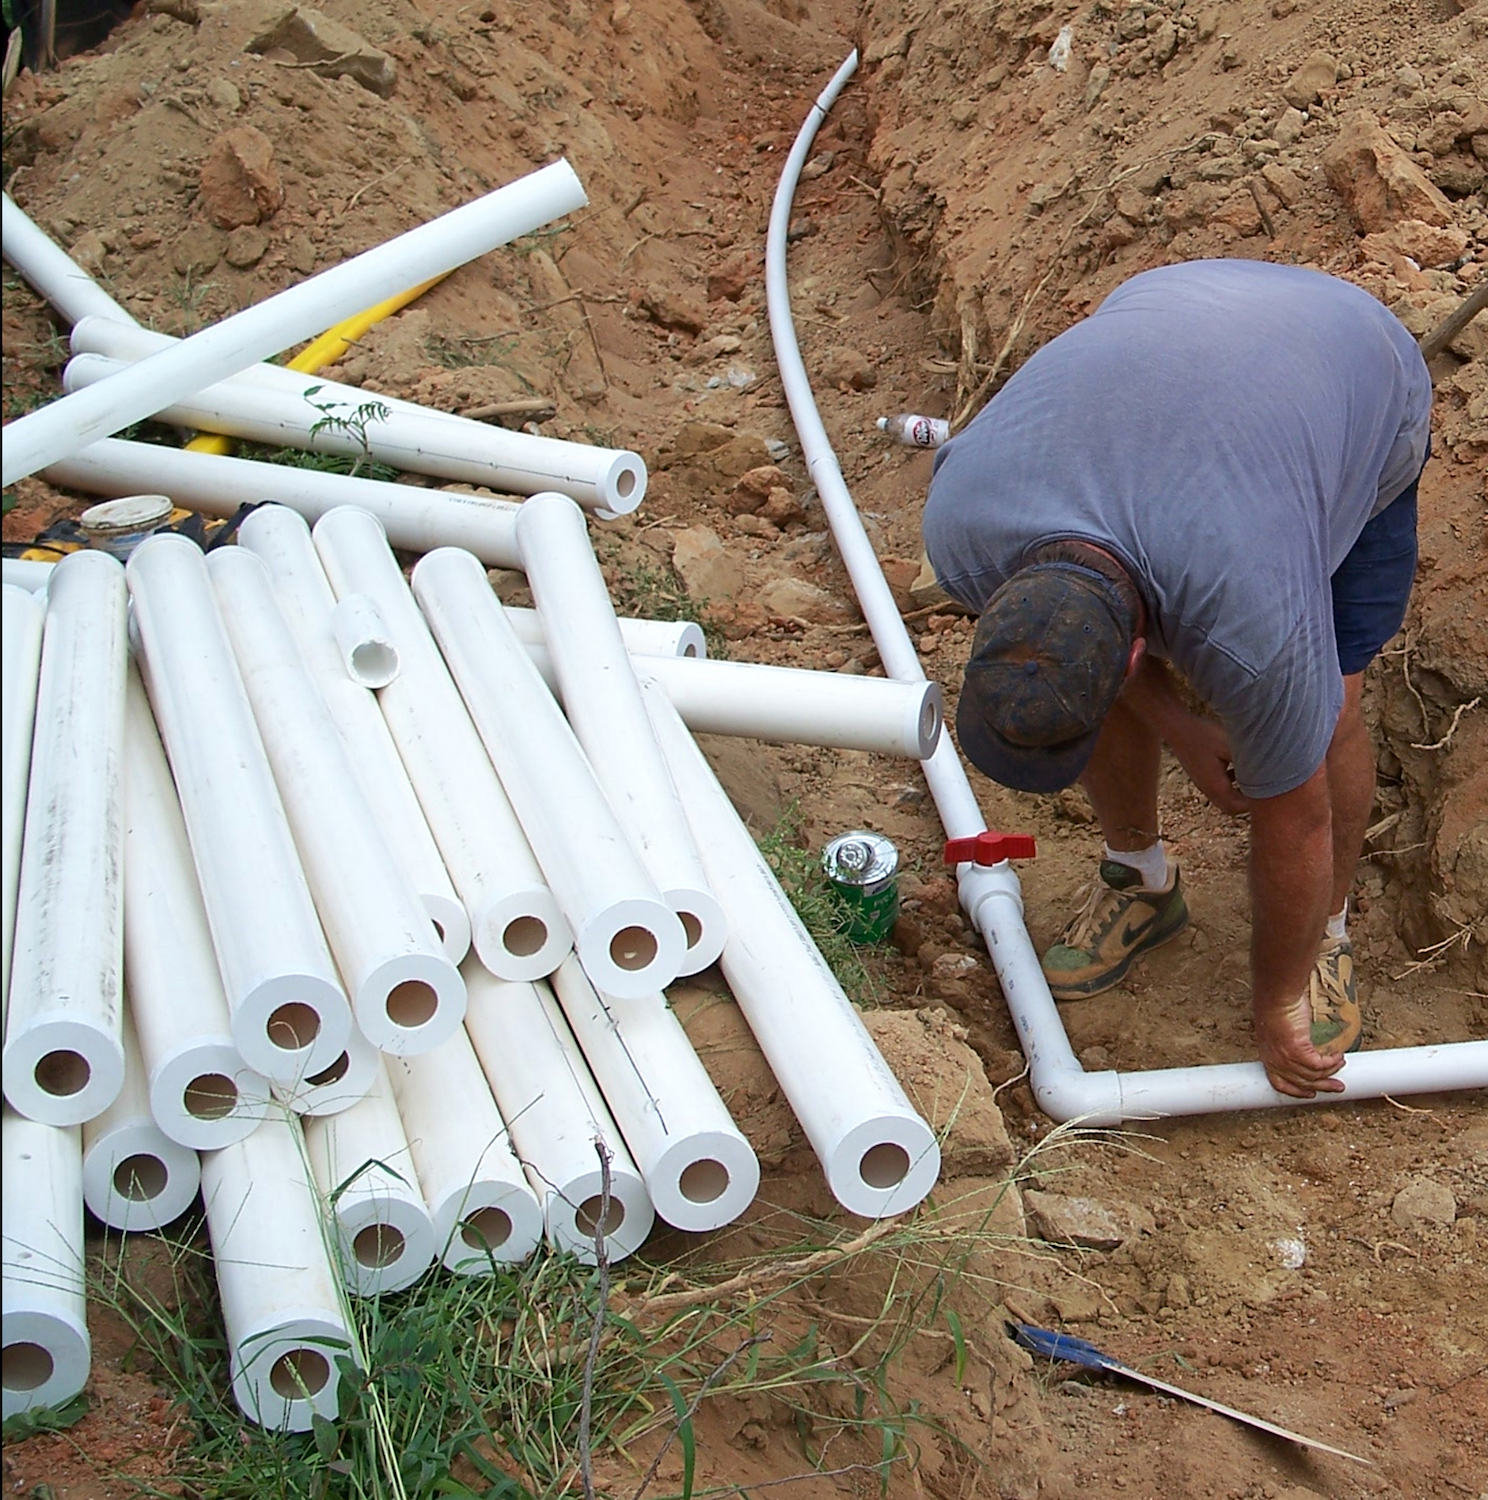 Both ends of the orifice shields – 4-foot-long PVC pipe – are plugged with end caps into which centered 2-inch holes have been drilled for the 1.50-inch PVC distribution pipe. (Photo by Kaylinn Gilstrap)